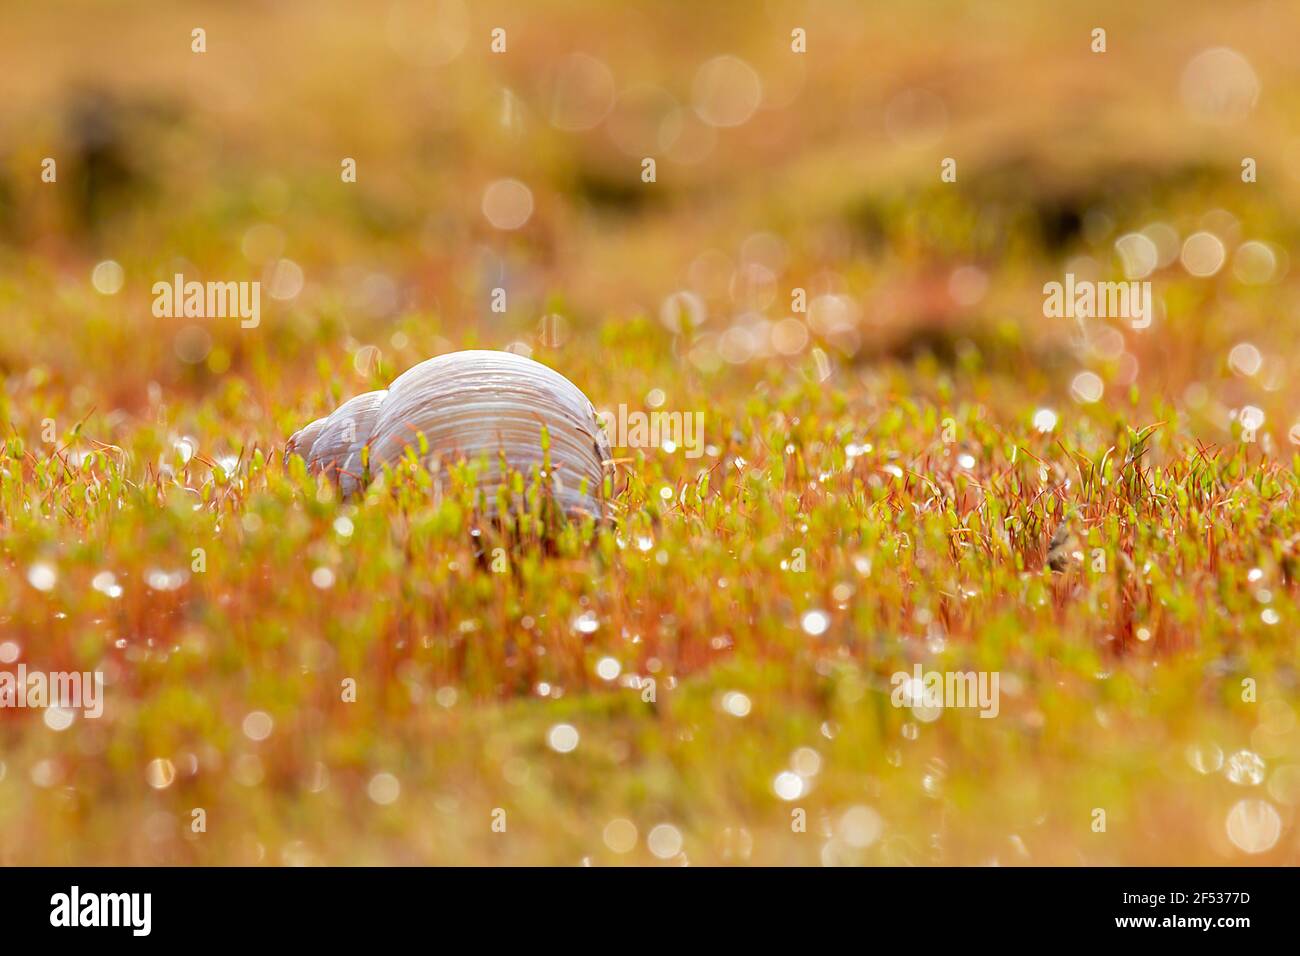 Snail shell in moss with raindrops, dew water droplet. Spring background Stock Photo